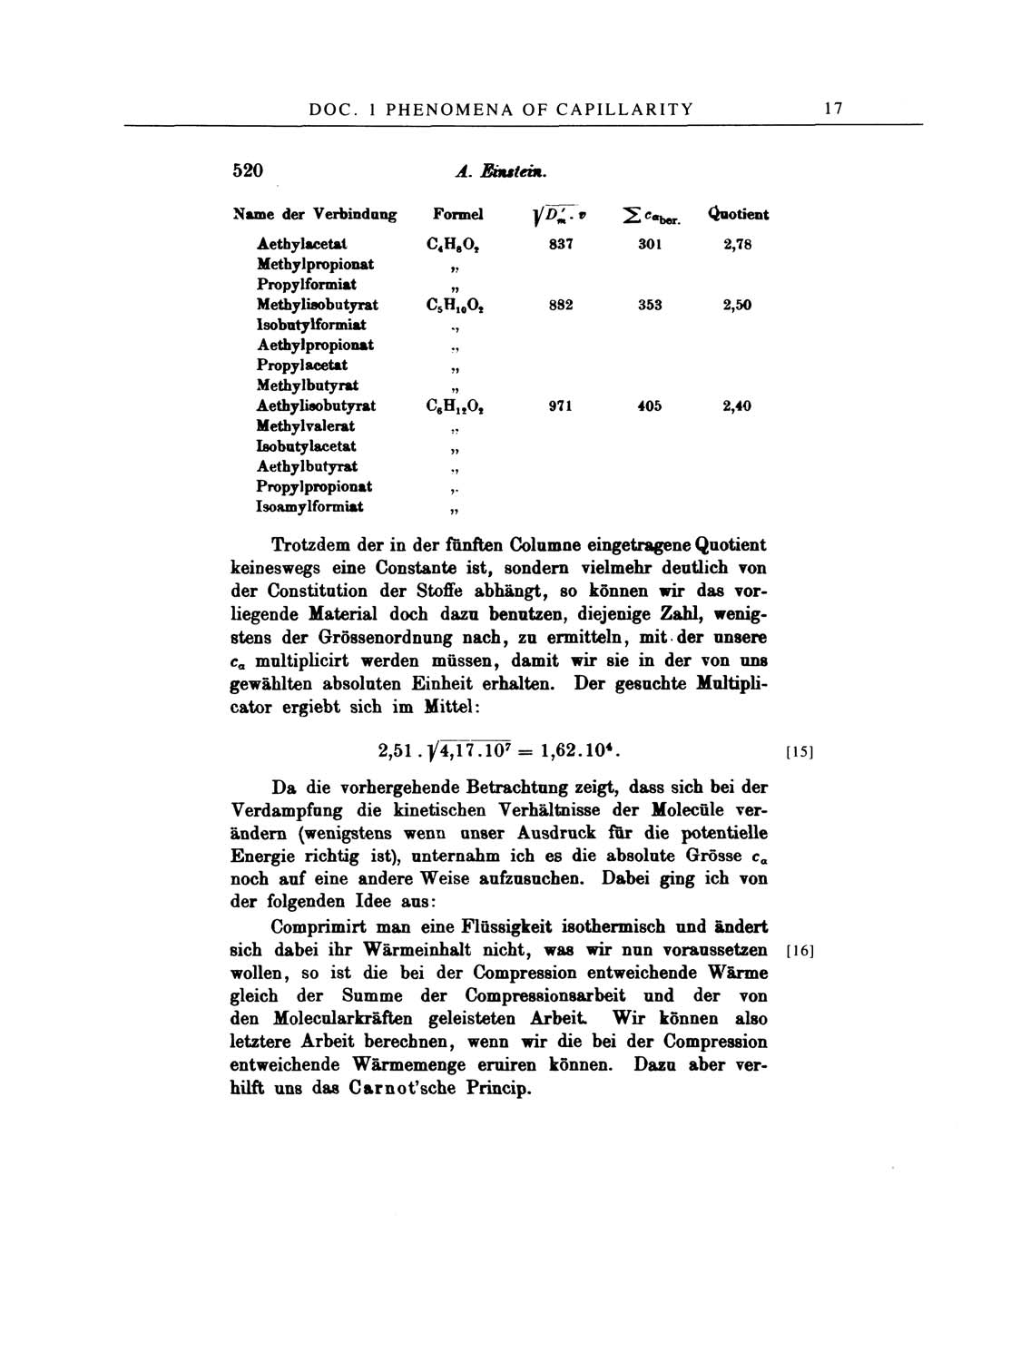 Volume 2: The Swiss Years: Writings, 1900-1909 page 17